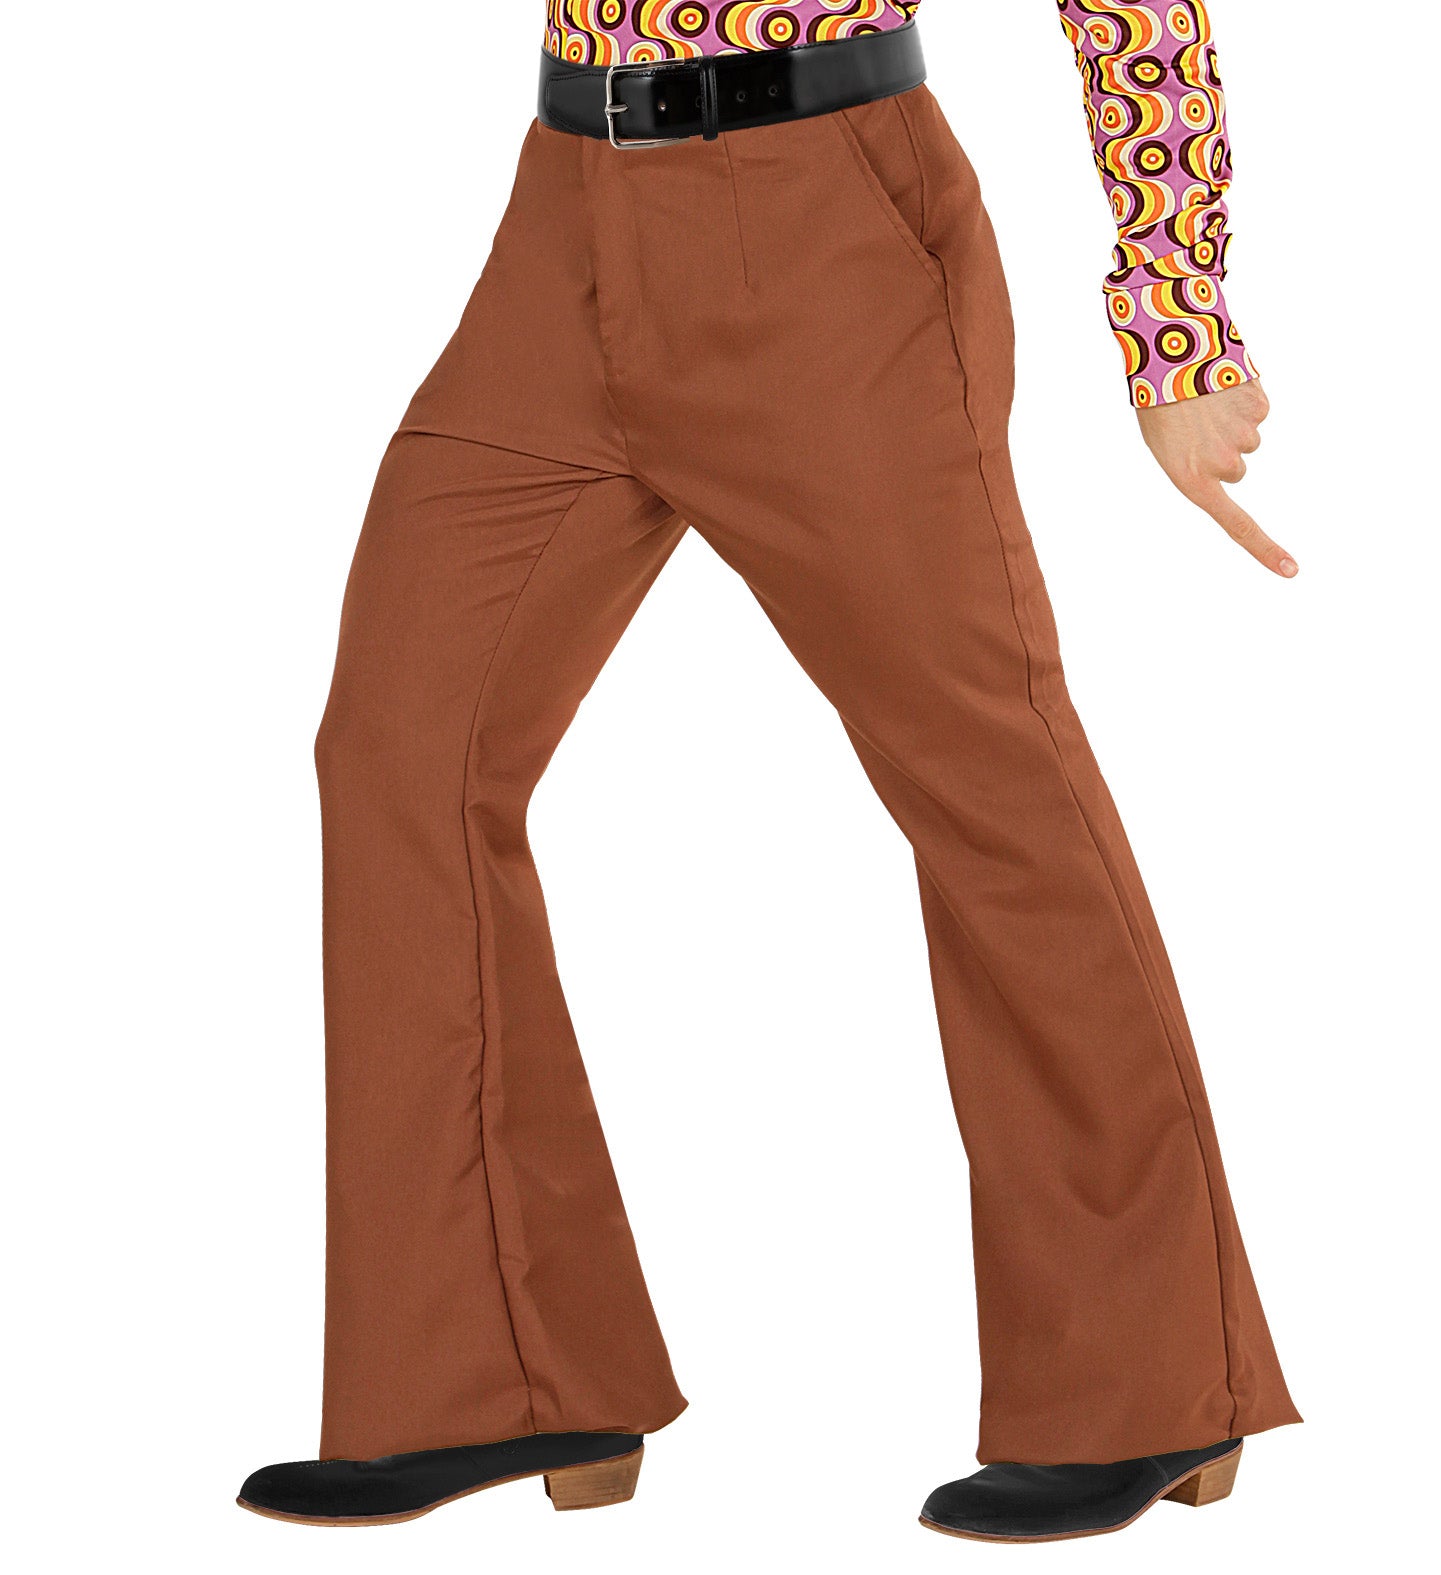 70's Groovy Disco Flares Trousers Brown